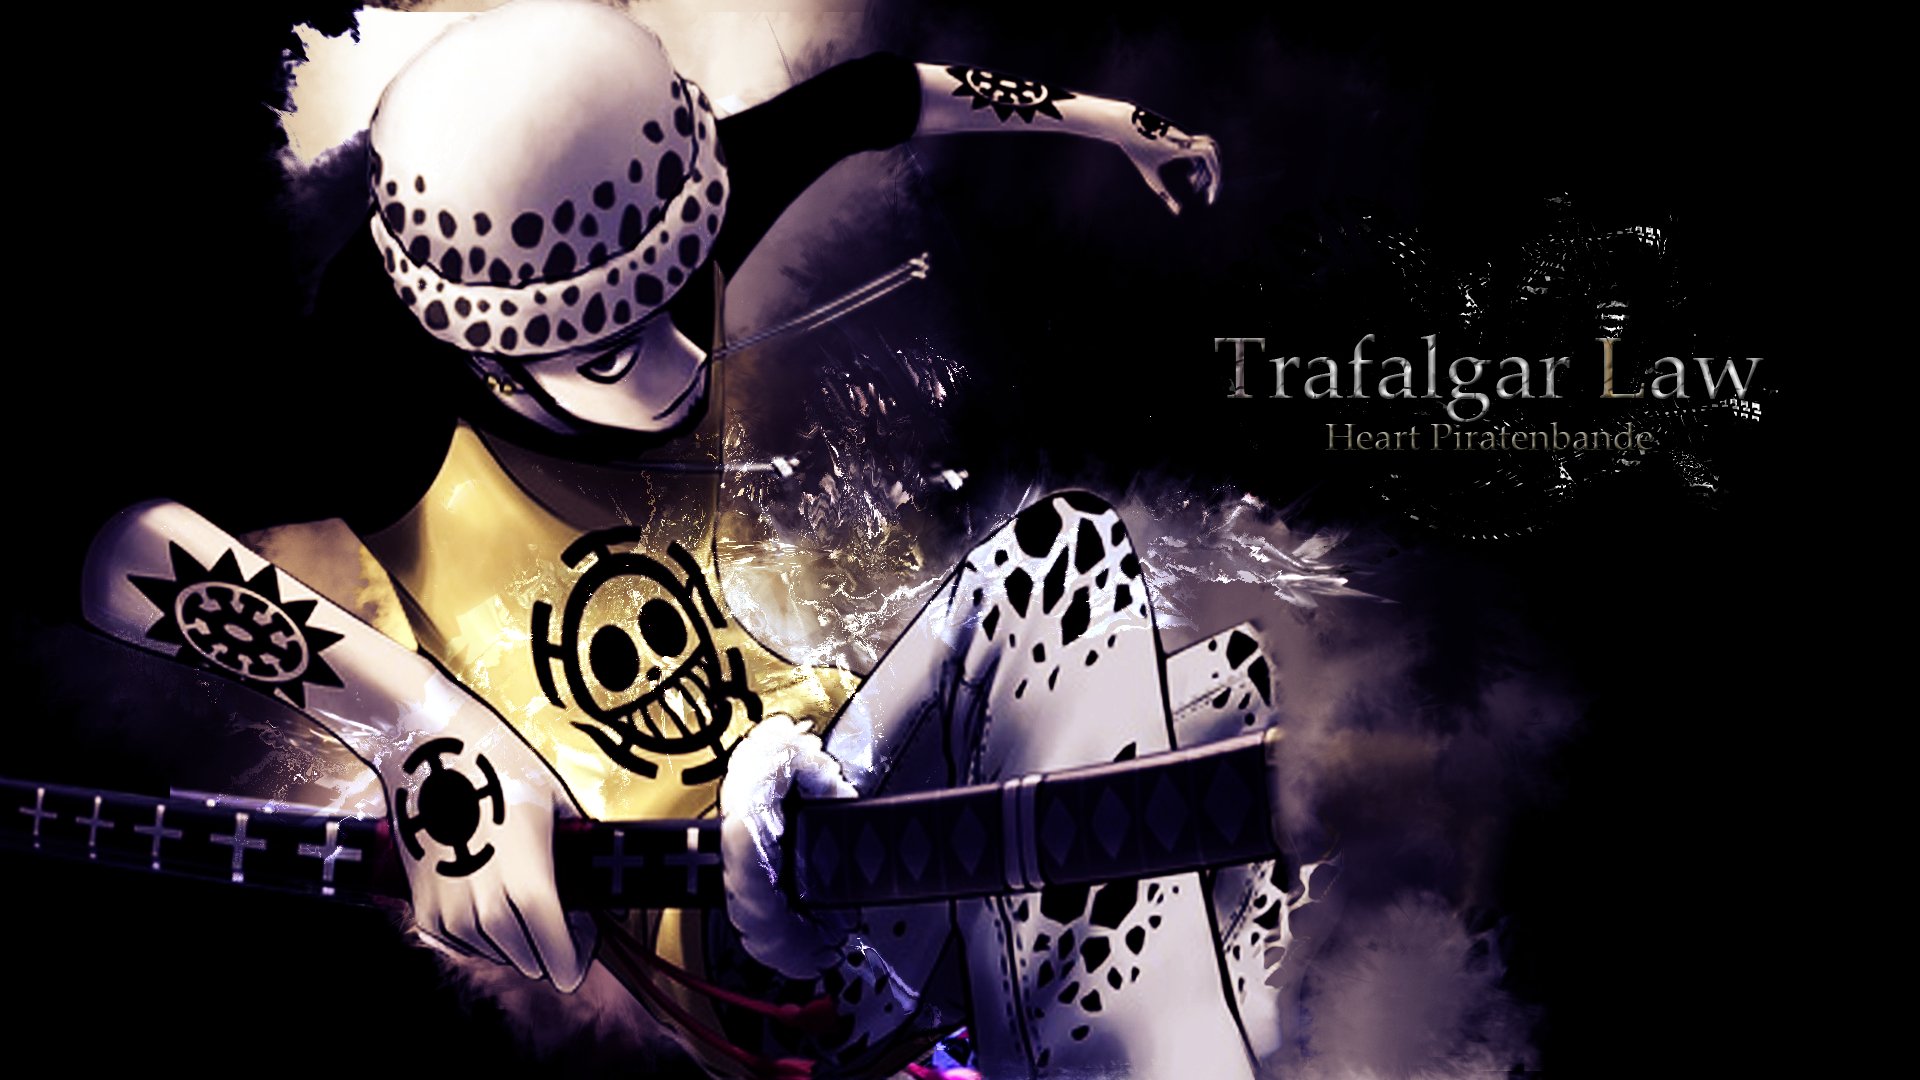 160 Trafalgar Law Hd Wallpapers Background Images